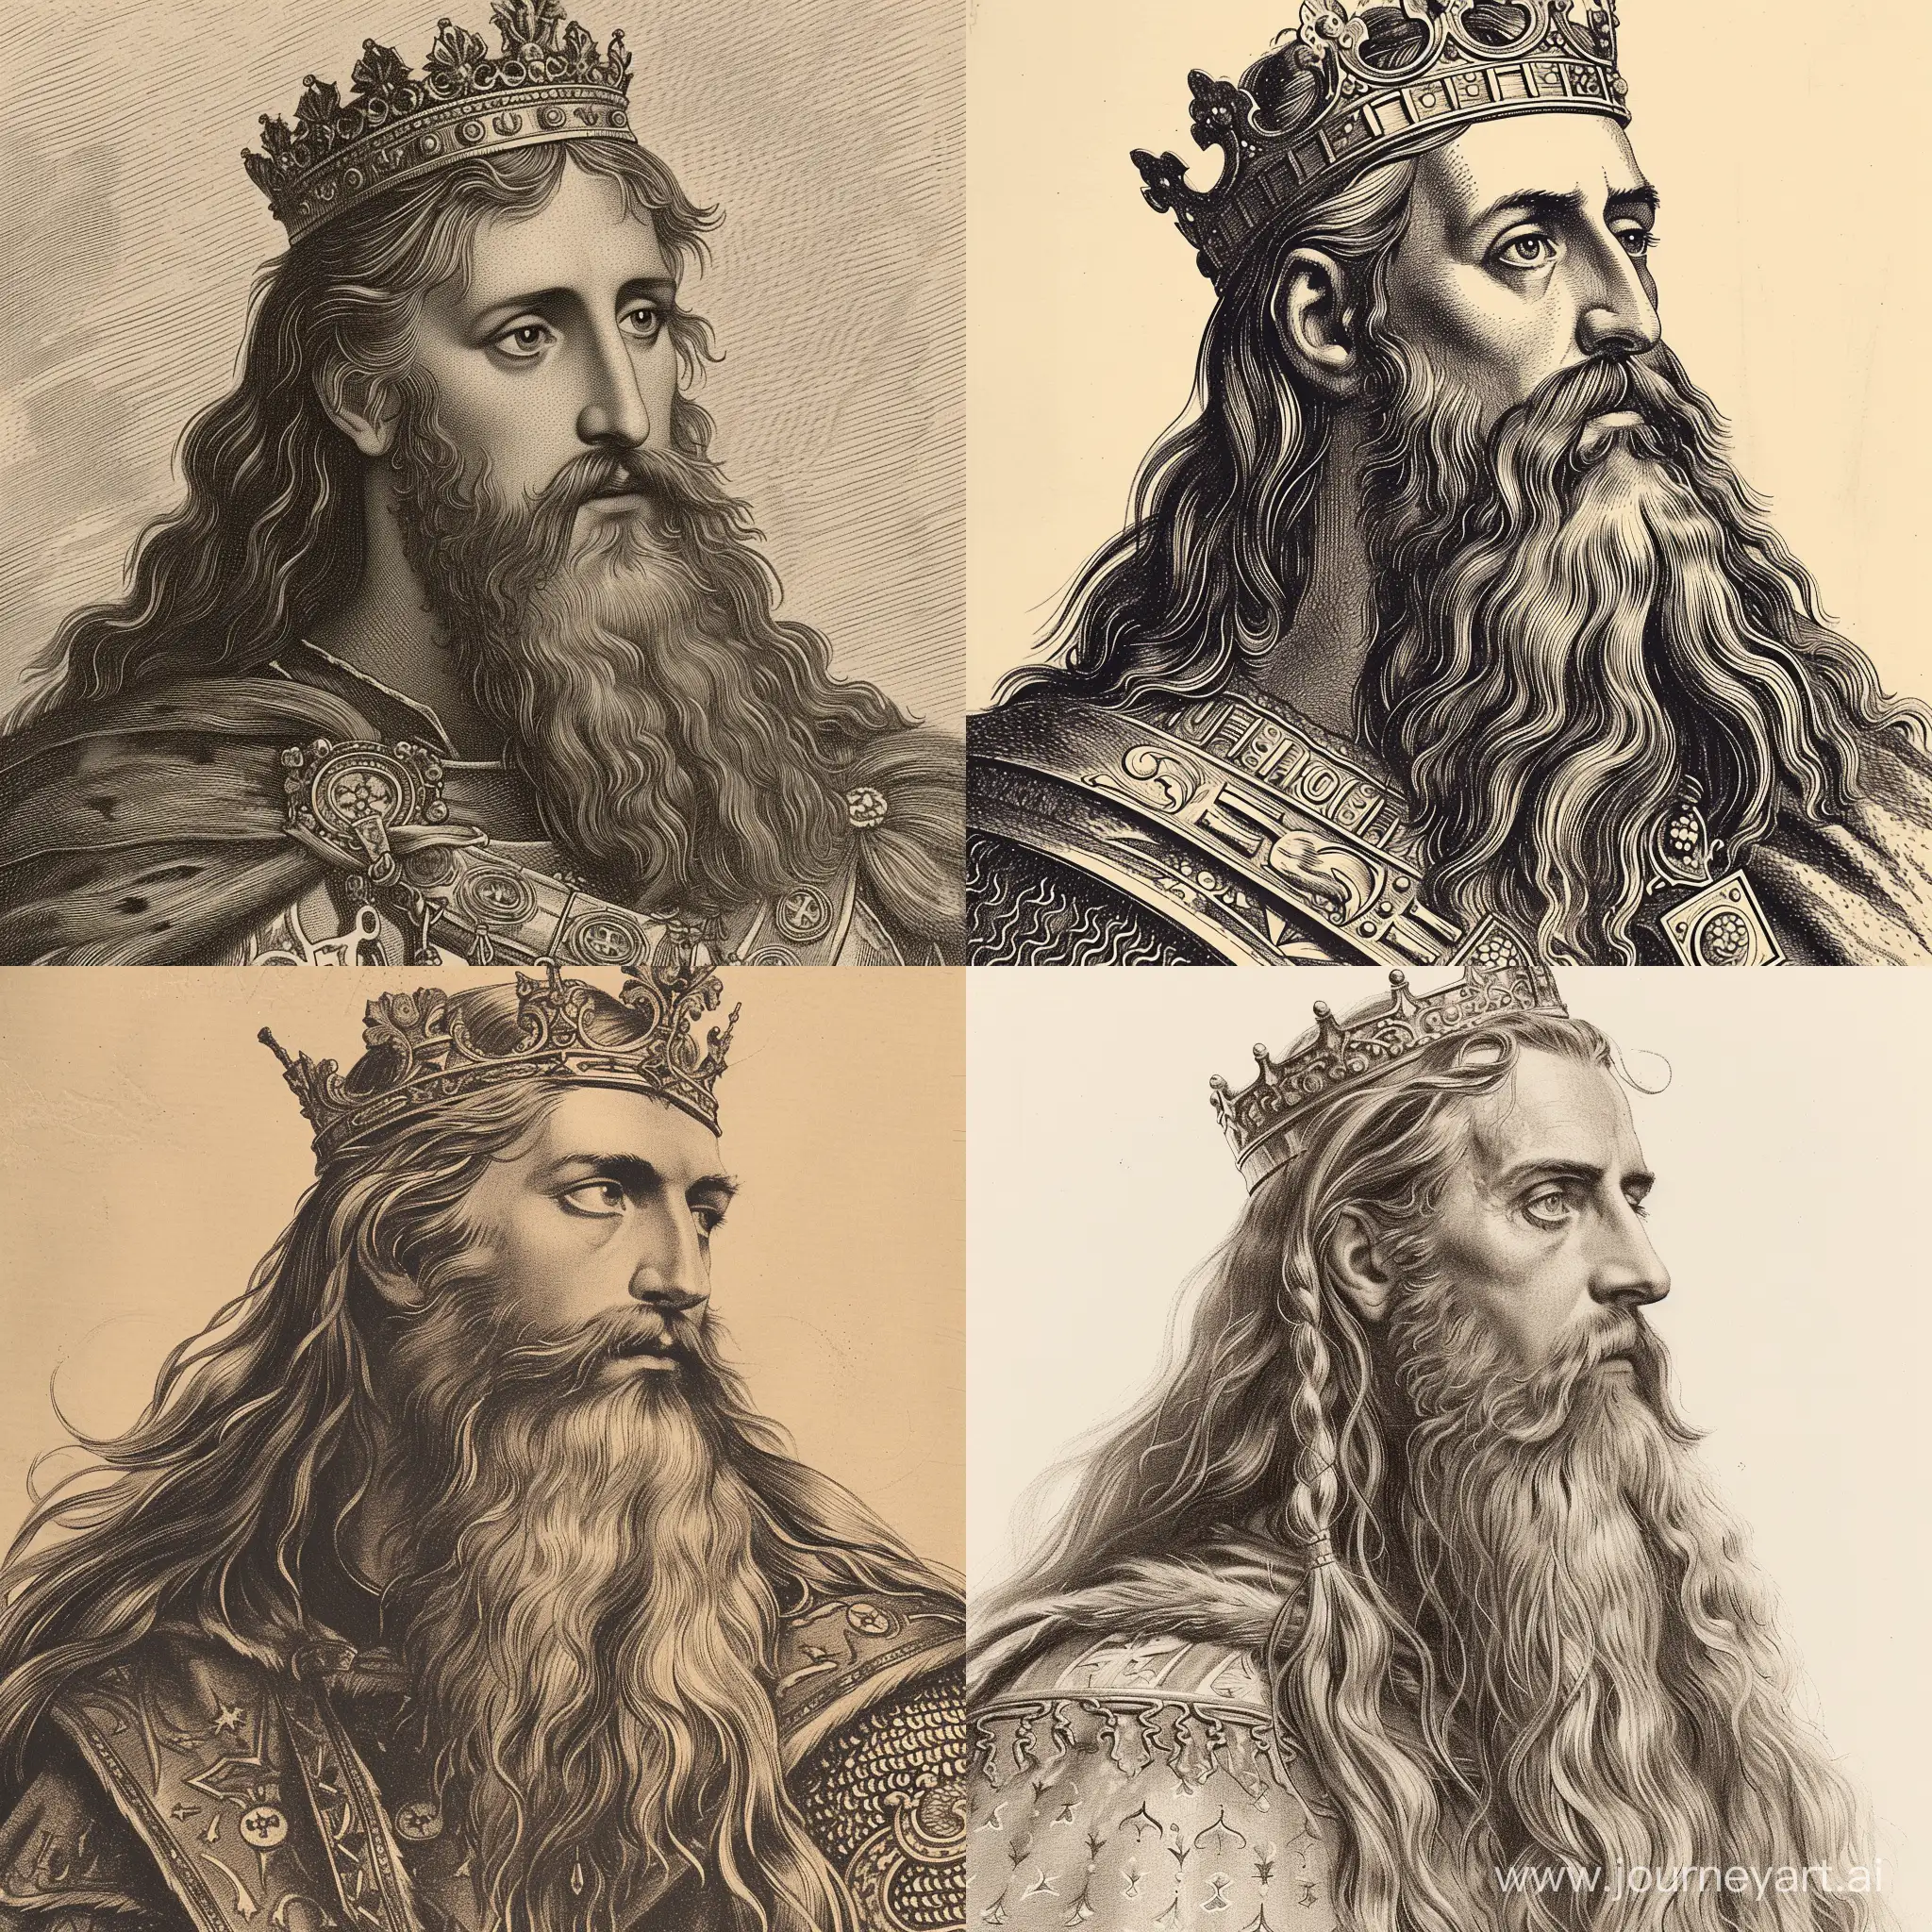 Majestic-Portrait-of-Holy-Roman-Emperor-Charlemagne-in-Emperor-Attire-and-Crown